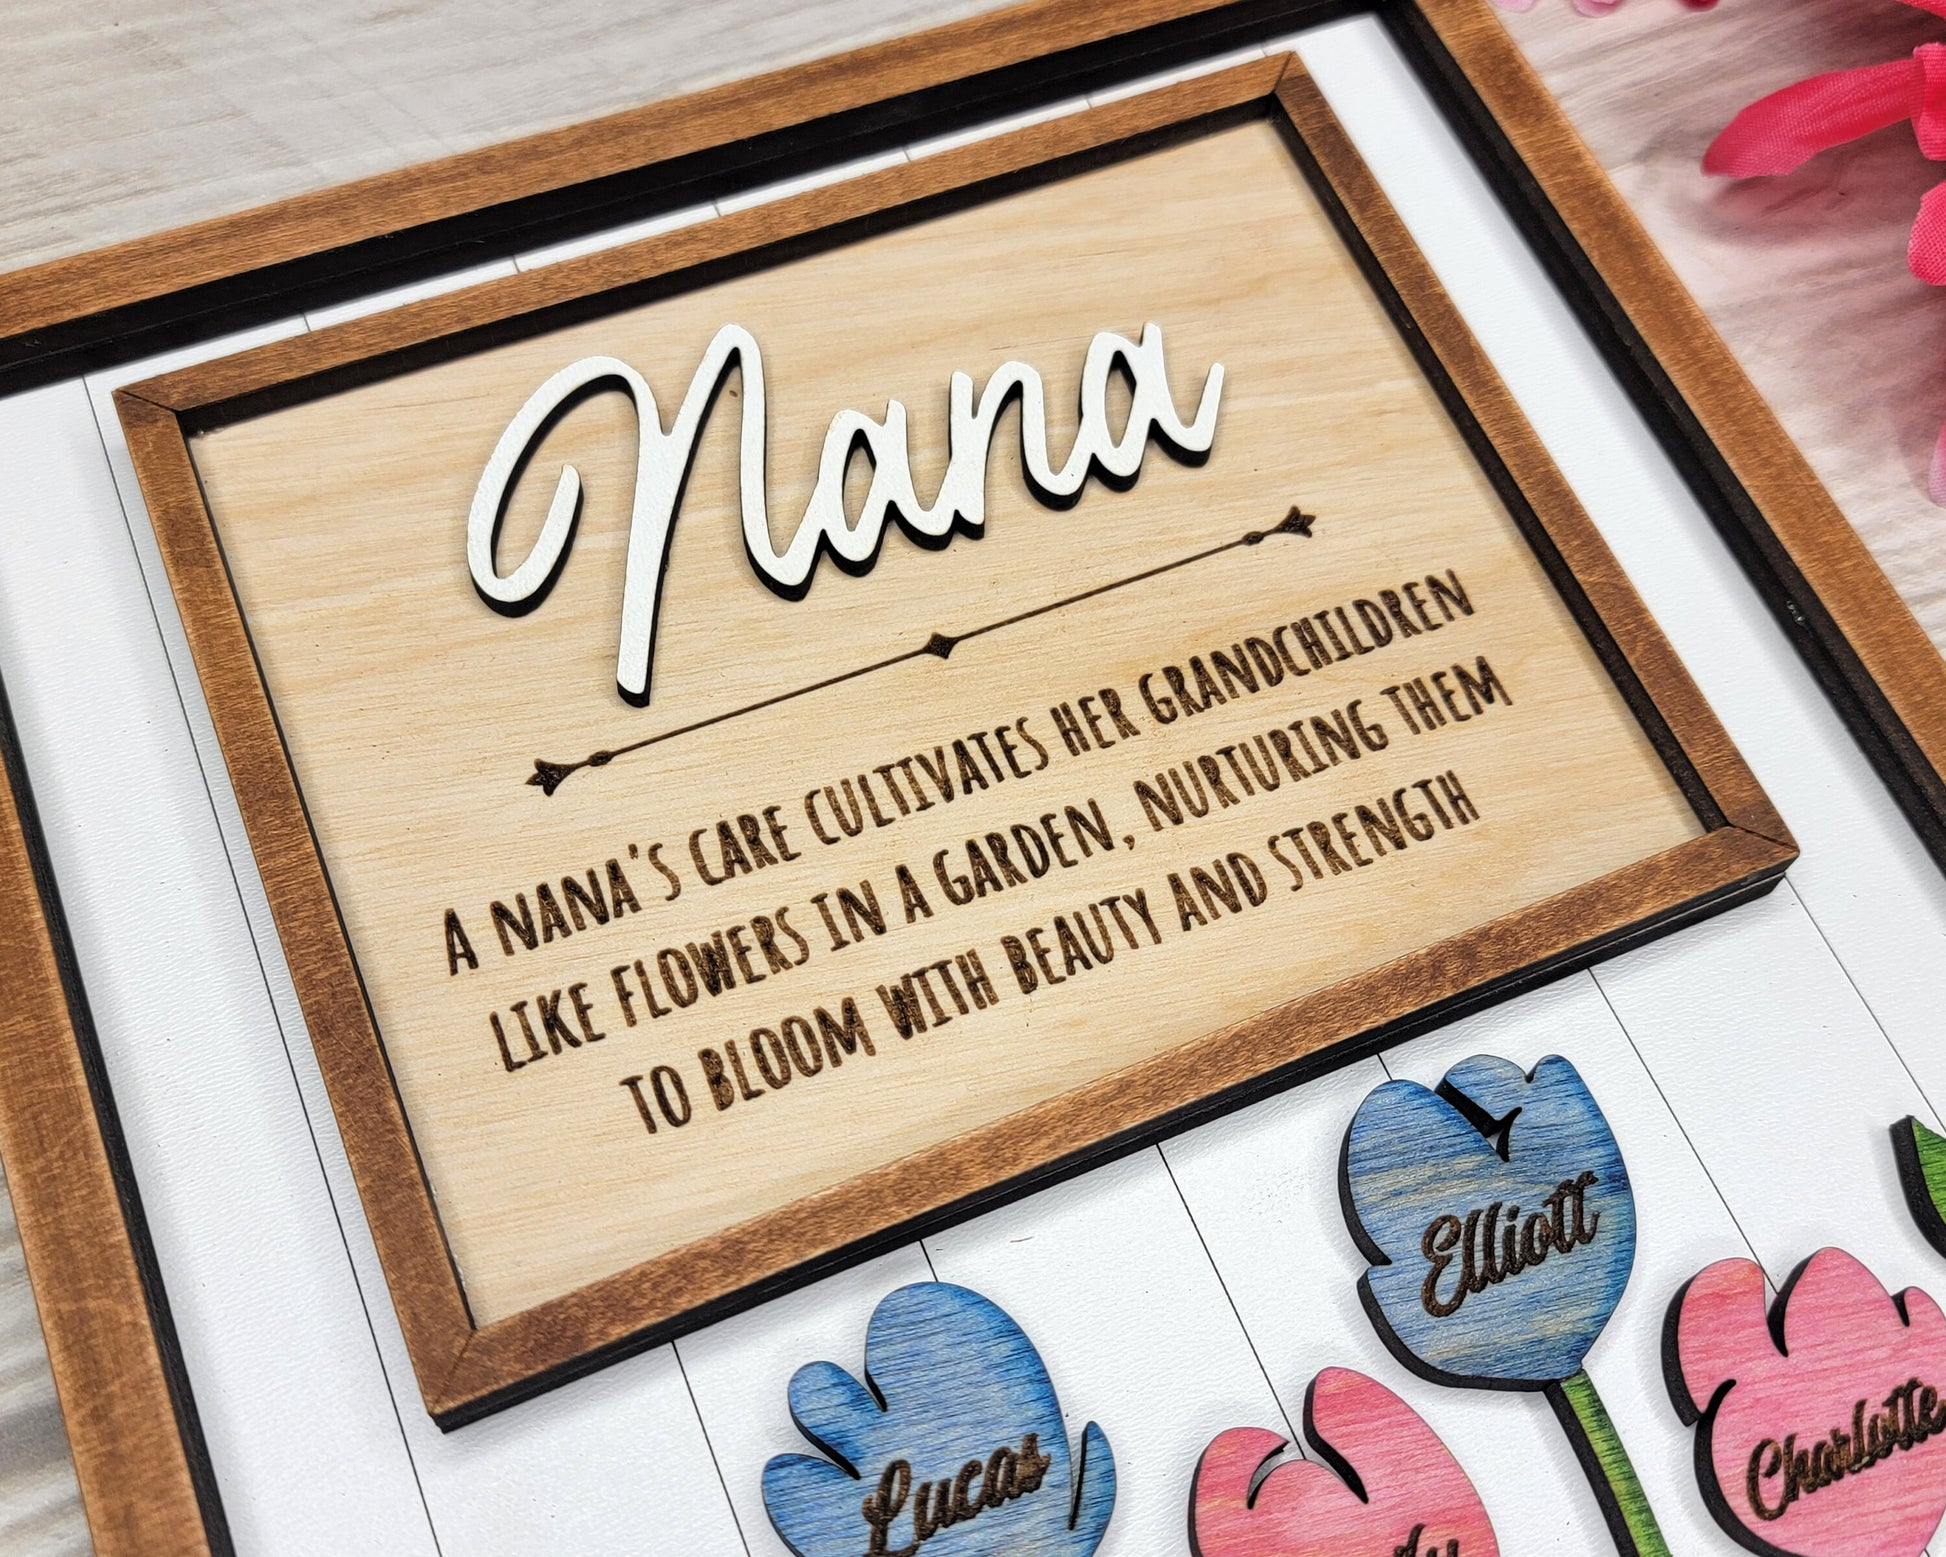 Garden of Love Signage - 1-6 Name - 11 variations of 'mom' - Tested on Glowforge, Xtool & Lightburn